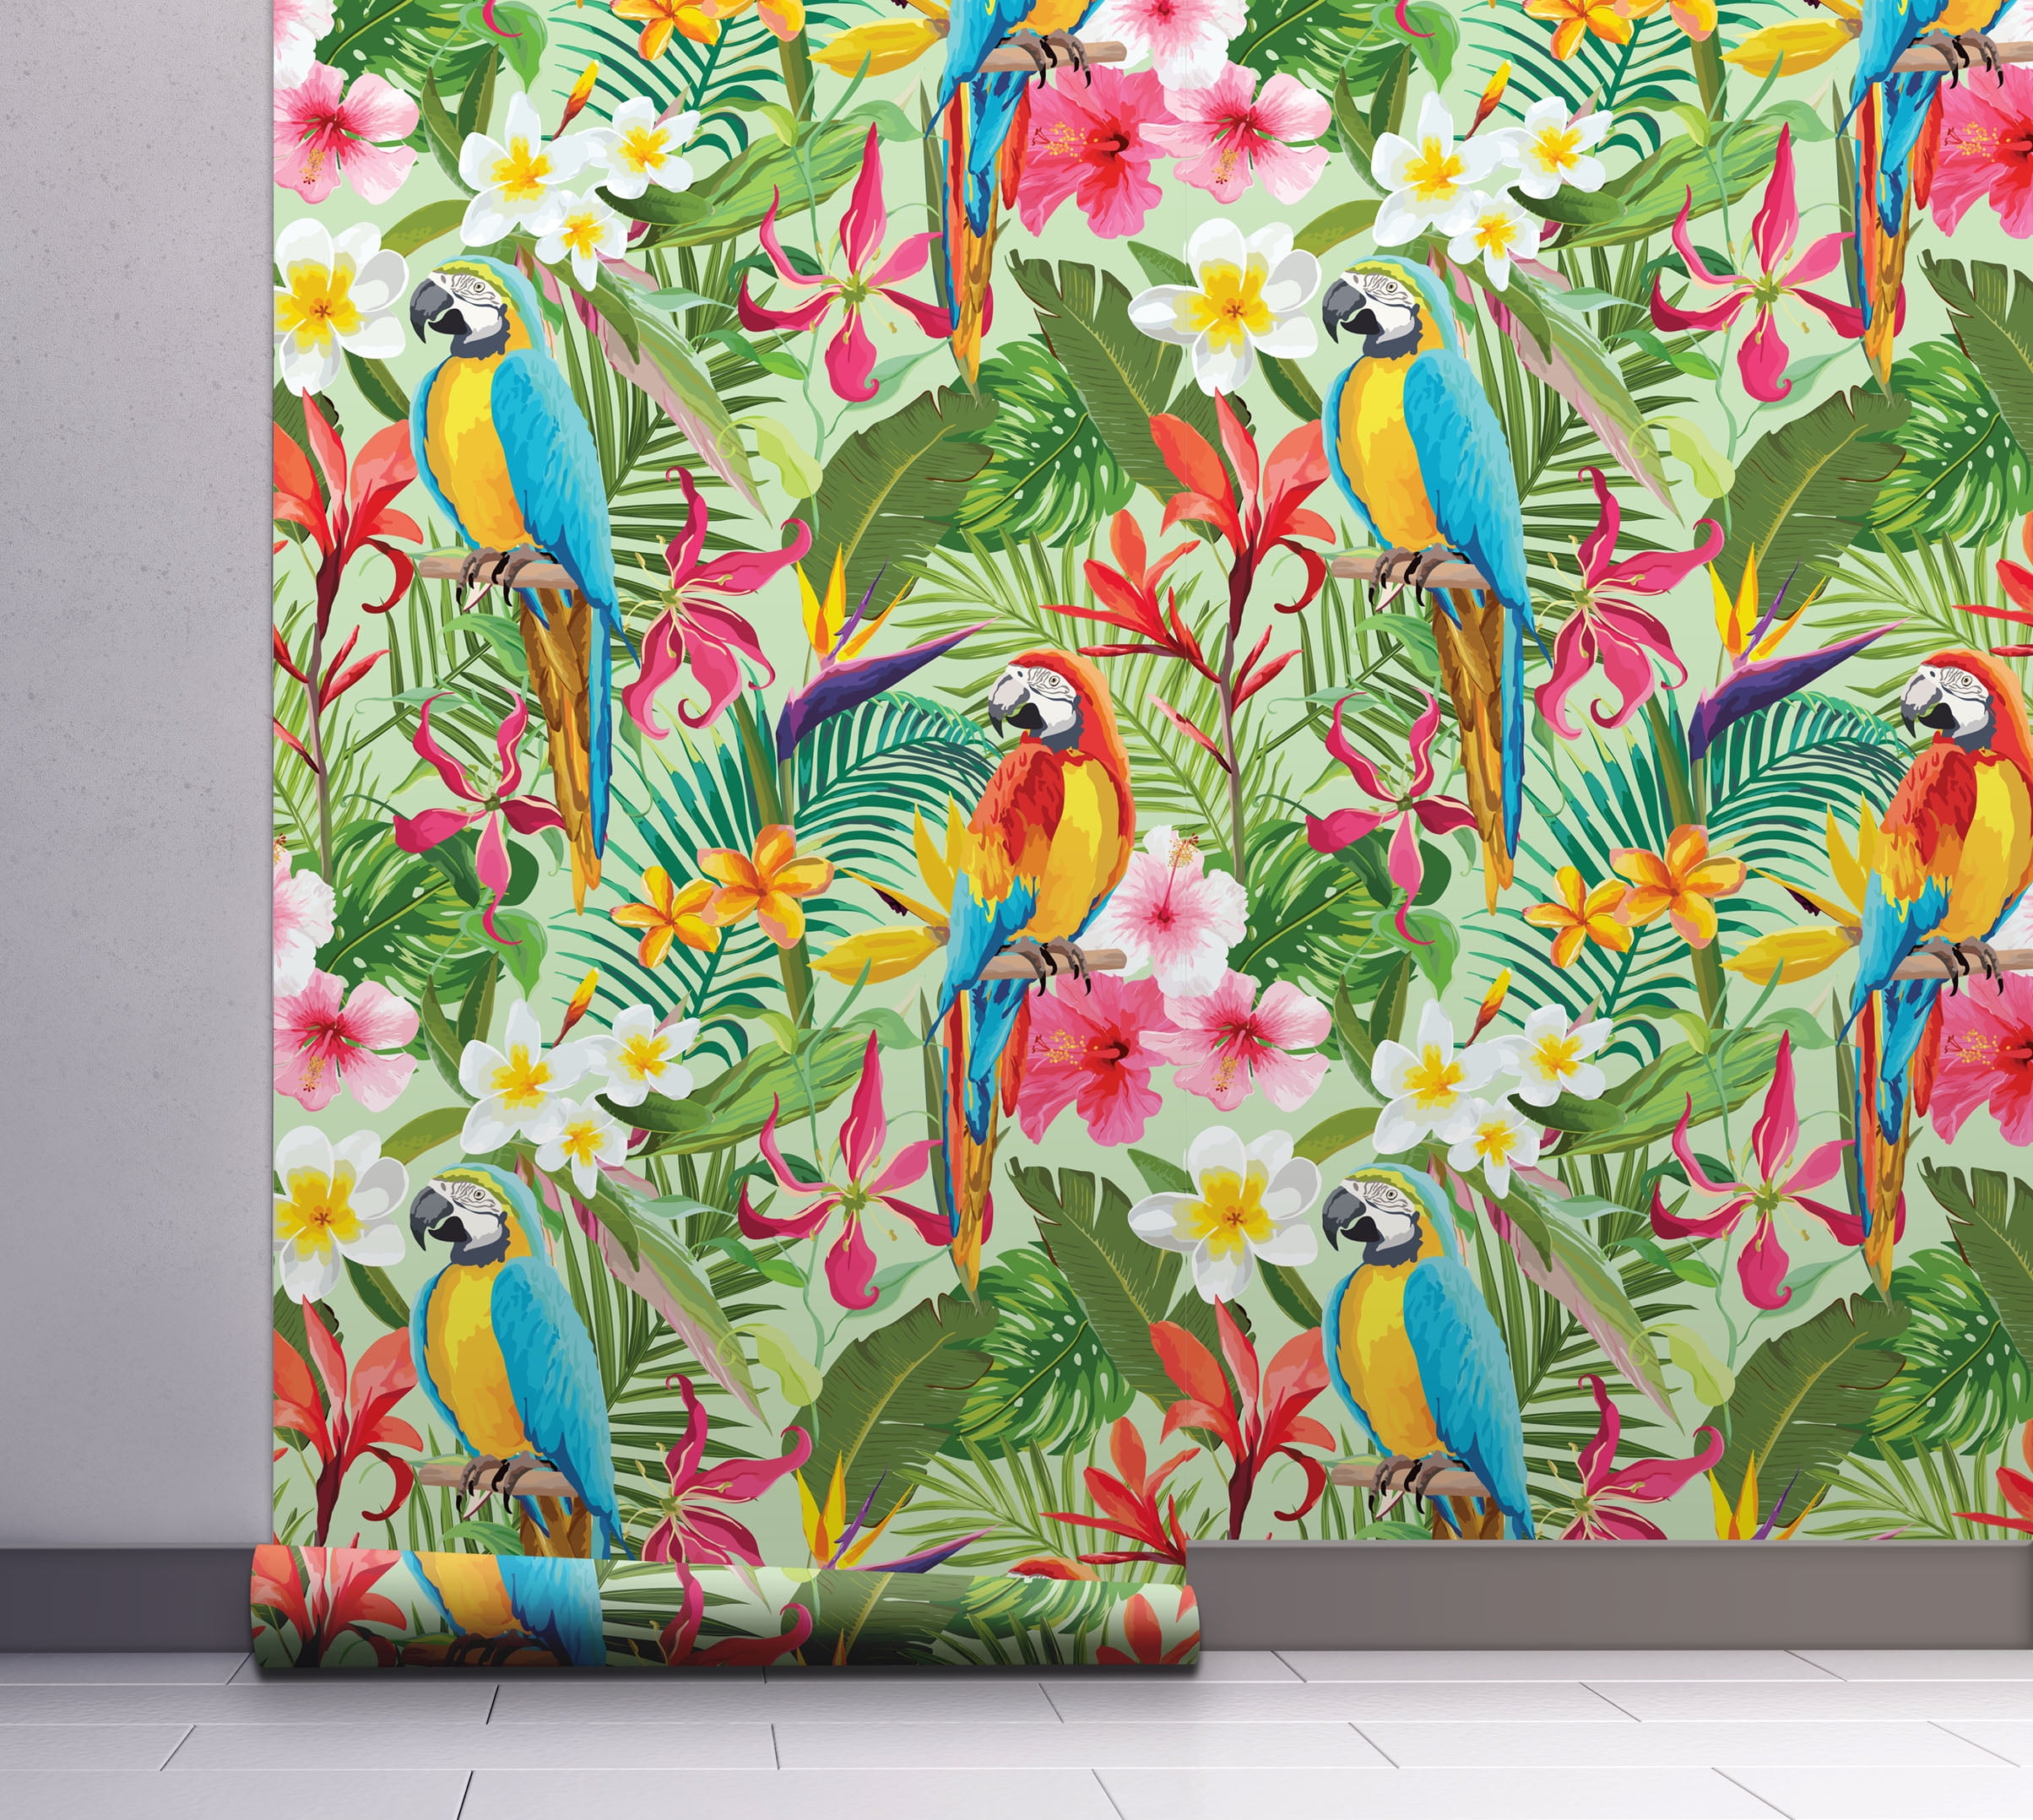 GW2111 Parrot Jungle Leaves Peel and Stick Wallpaper Roll  inch Wide x  18 ft. Long, Multicolor 